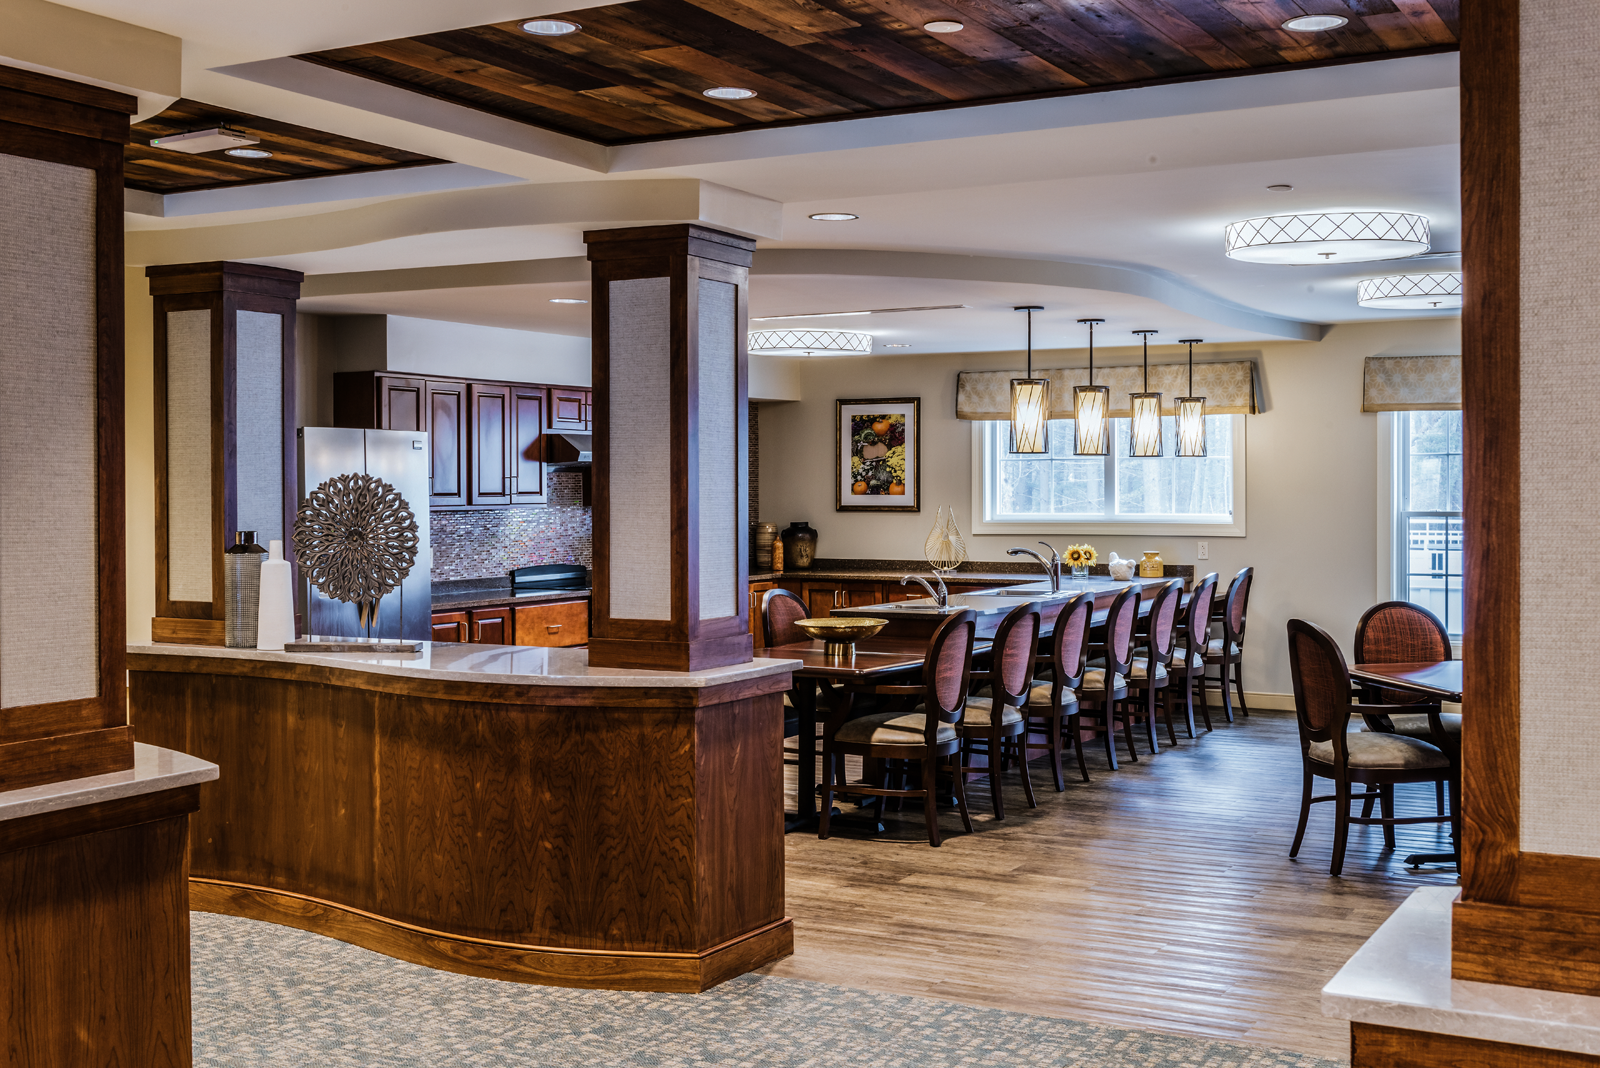 Country kitchen interior design for assisted living community